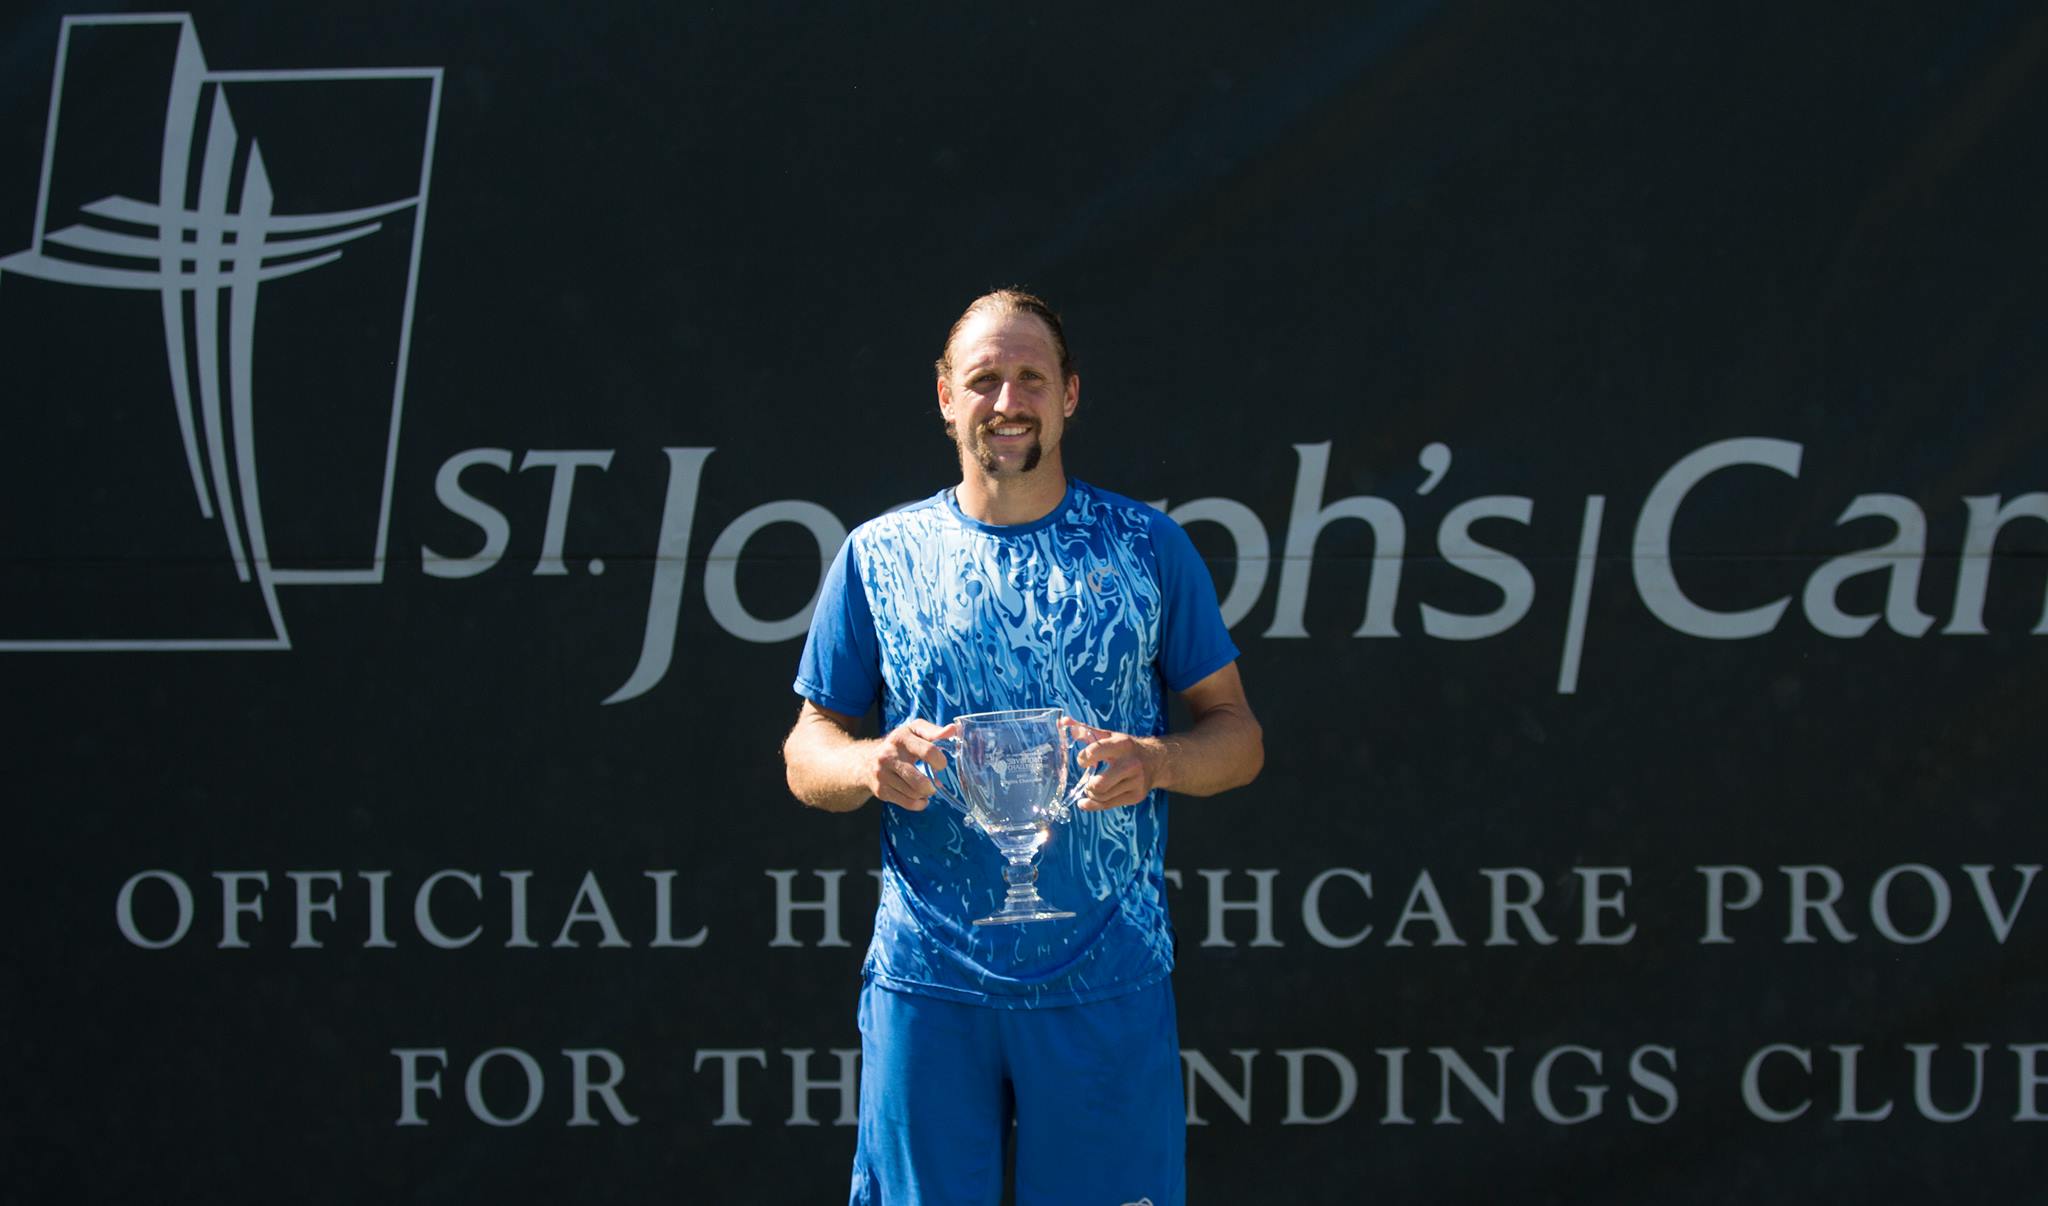 A male tennis player holds his crystal trophy after winning at the Savannah Challenger tennis tournament.